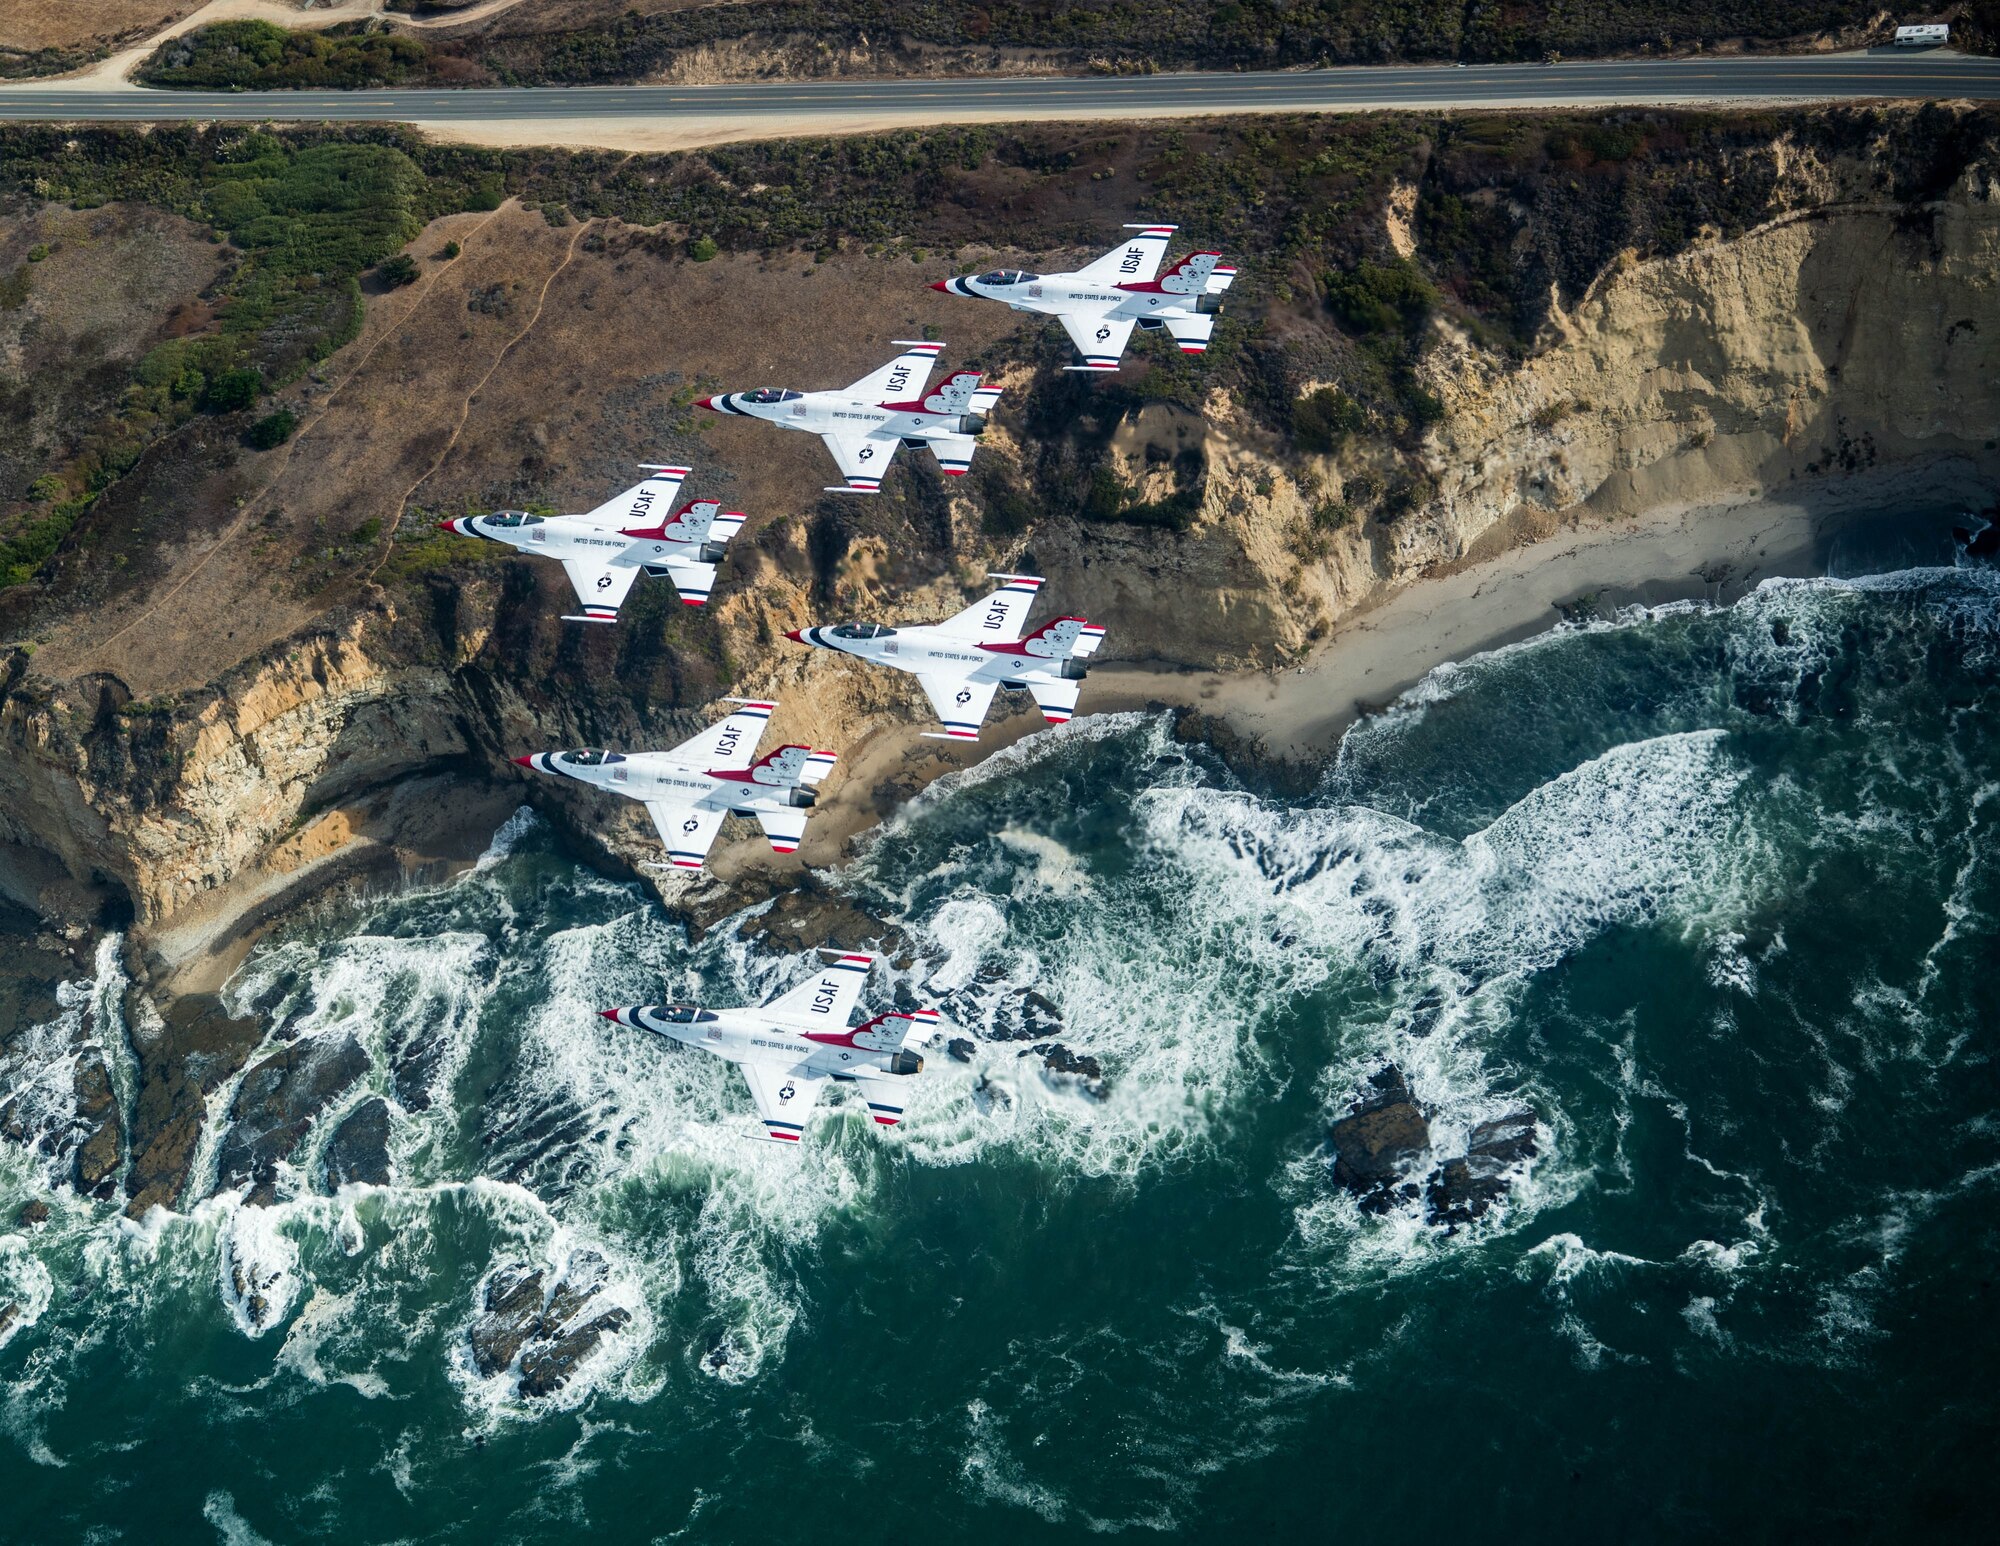 The U.S. Air Force Air Demonstration Squadron "Thunderbirds" fly near the Pacific Coast Oct. 1, 2018, while returning to Nellis Air Force Base, Nev. Since 1953, the Thunderbirds have served as America’s premier air demonstration squadron. (U.S. Air Force photo by Staff Sgt. Ashley Corkins)